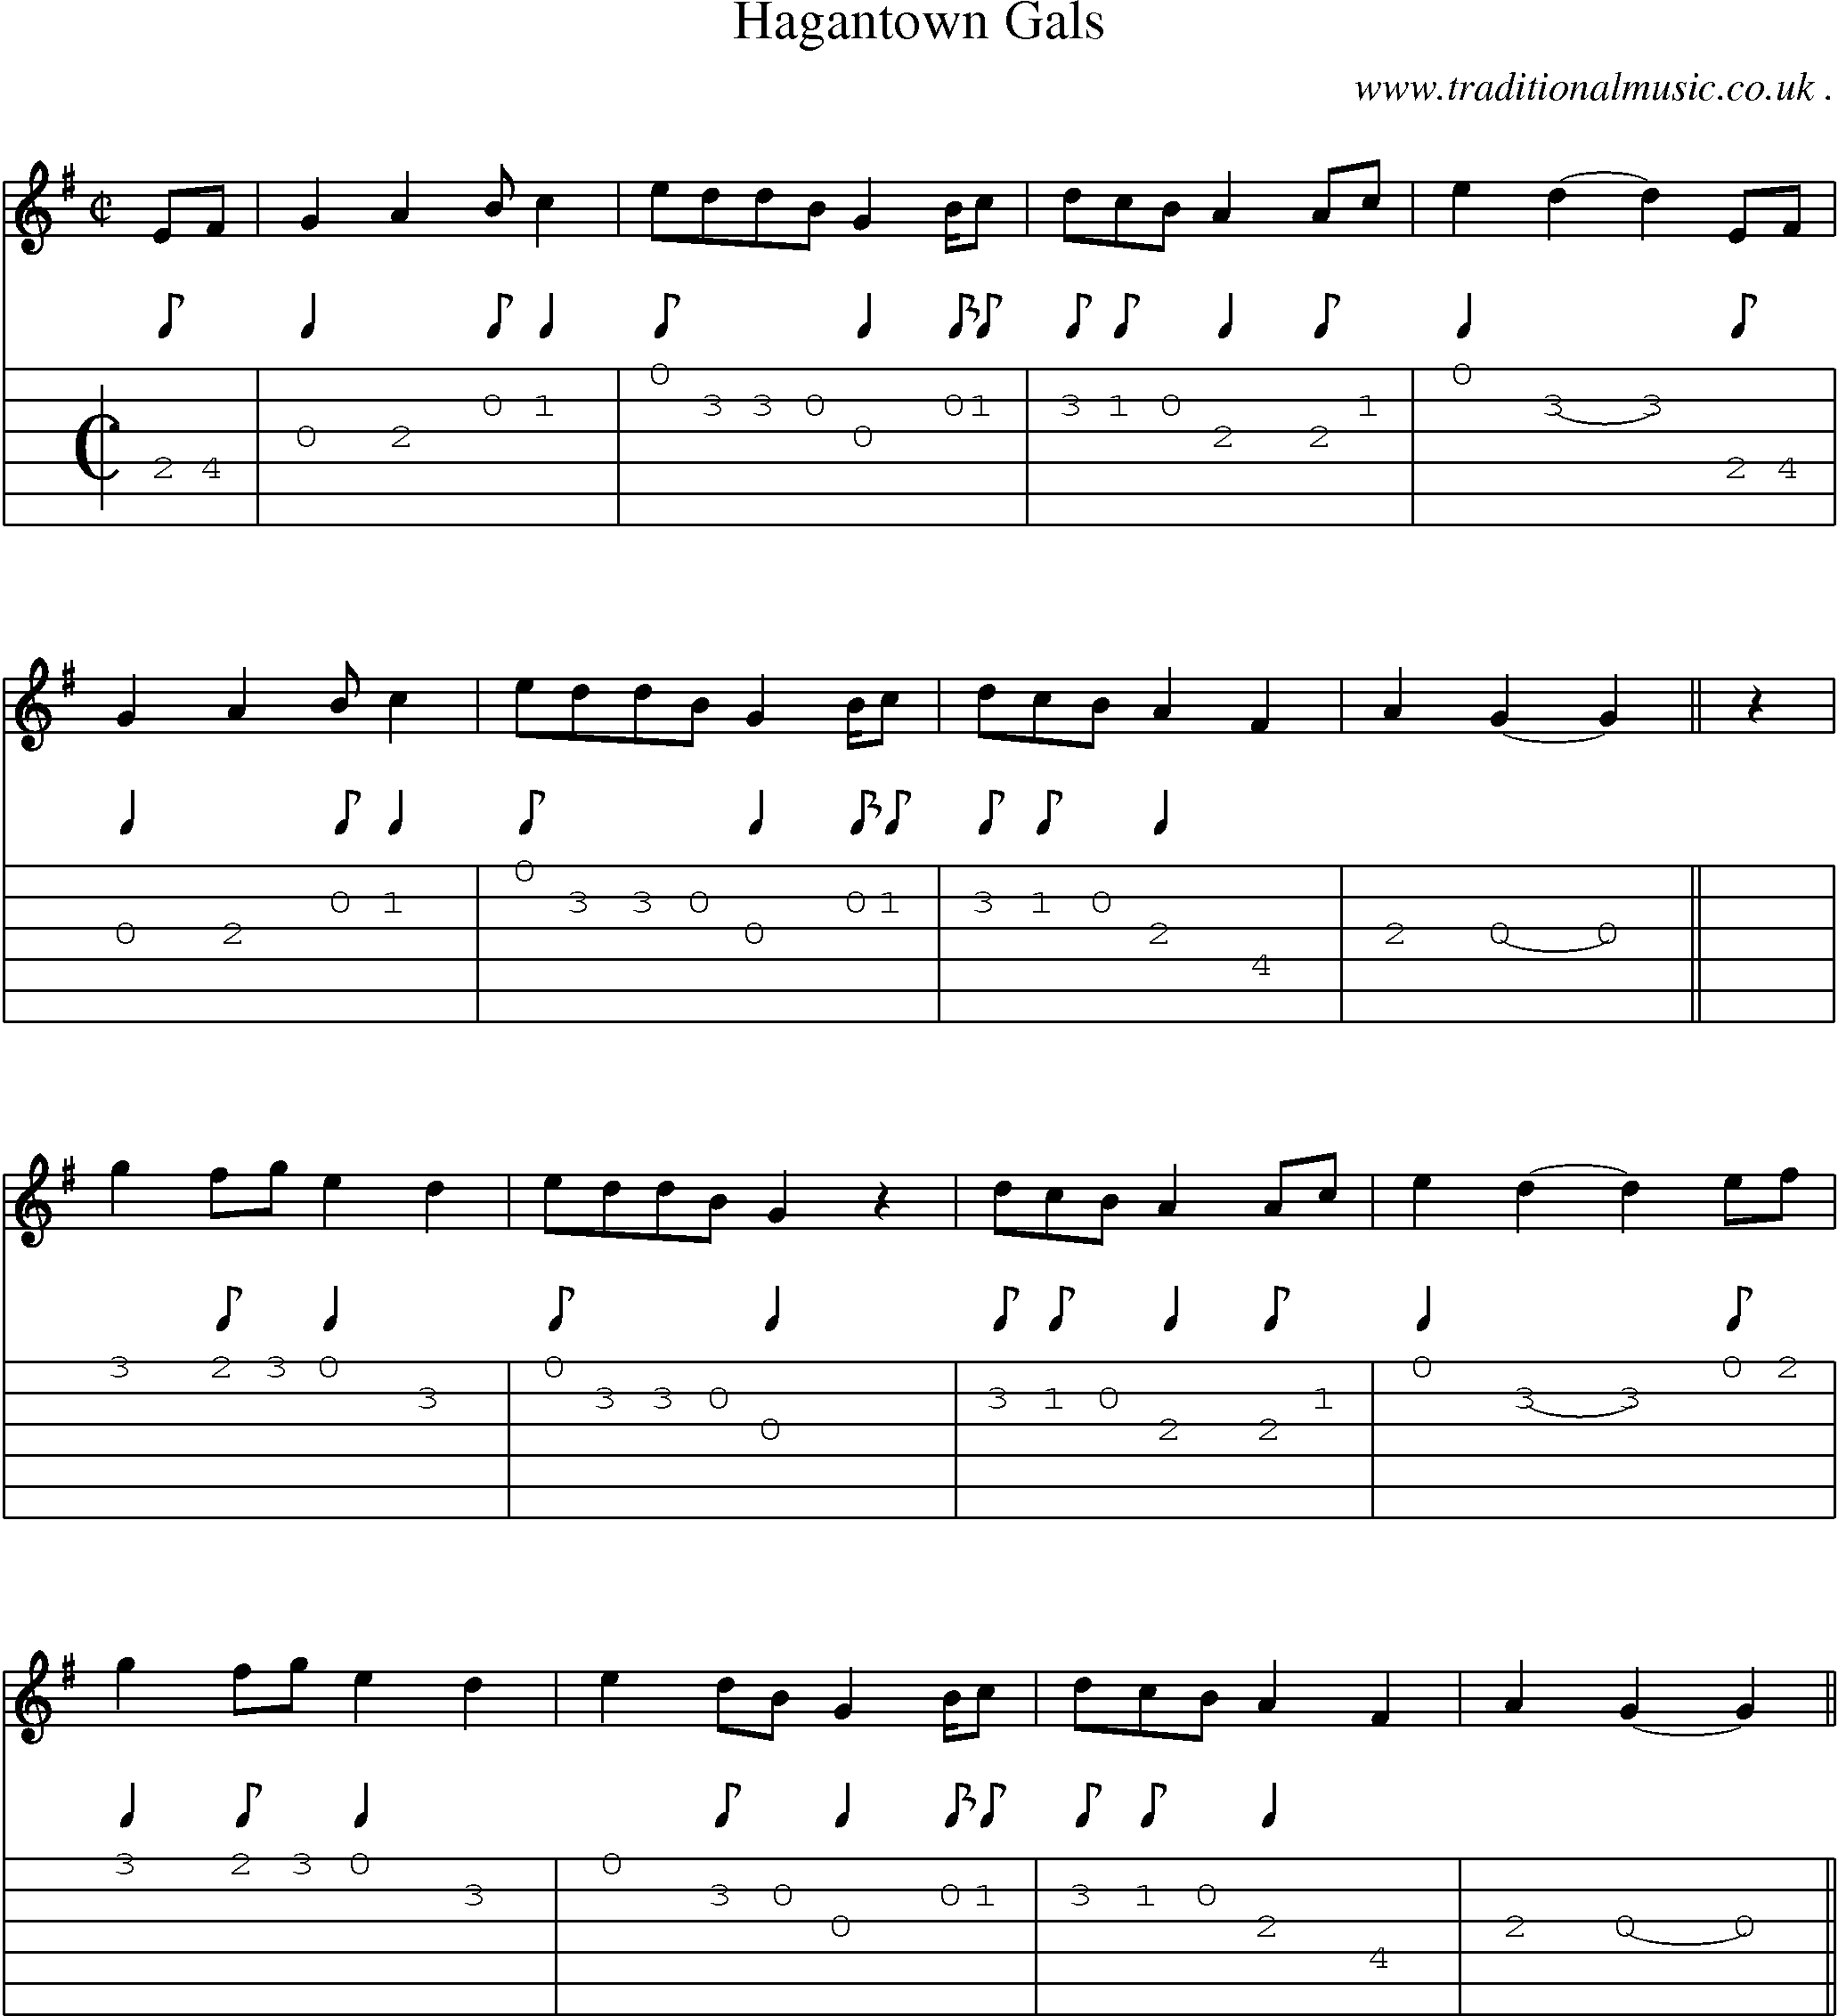 Music Score and Guitar Tabs for Hagantown Gals